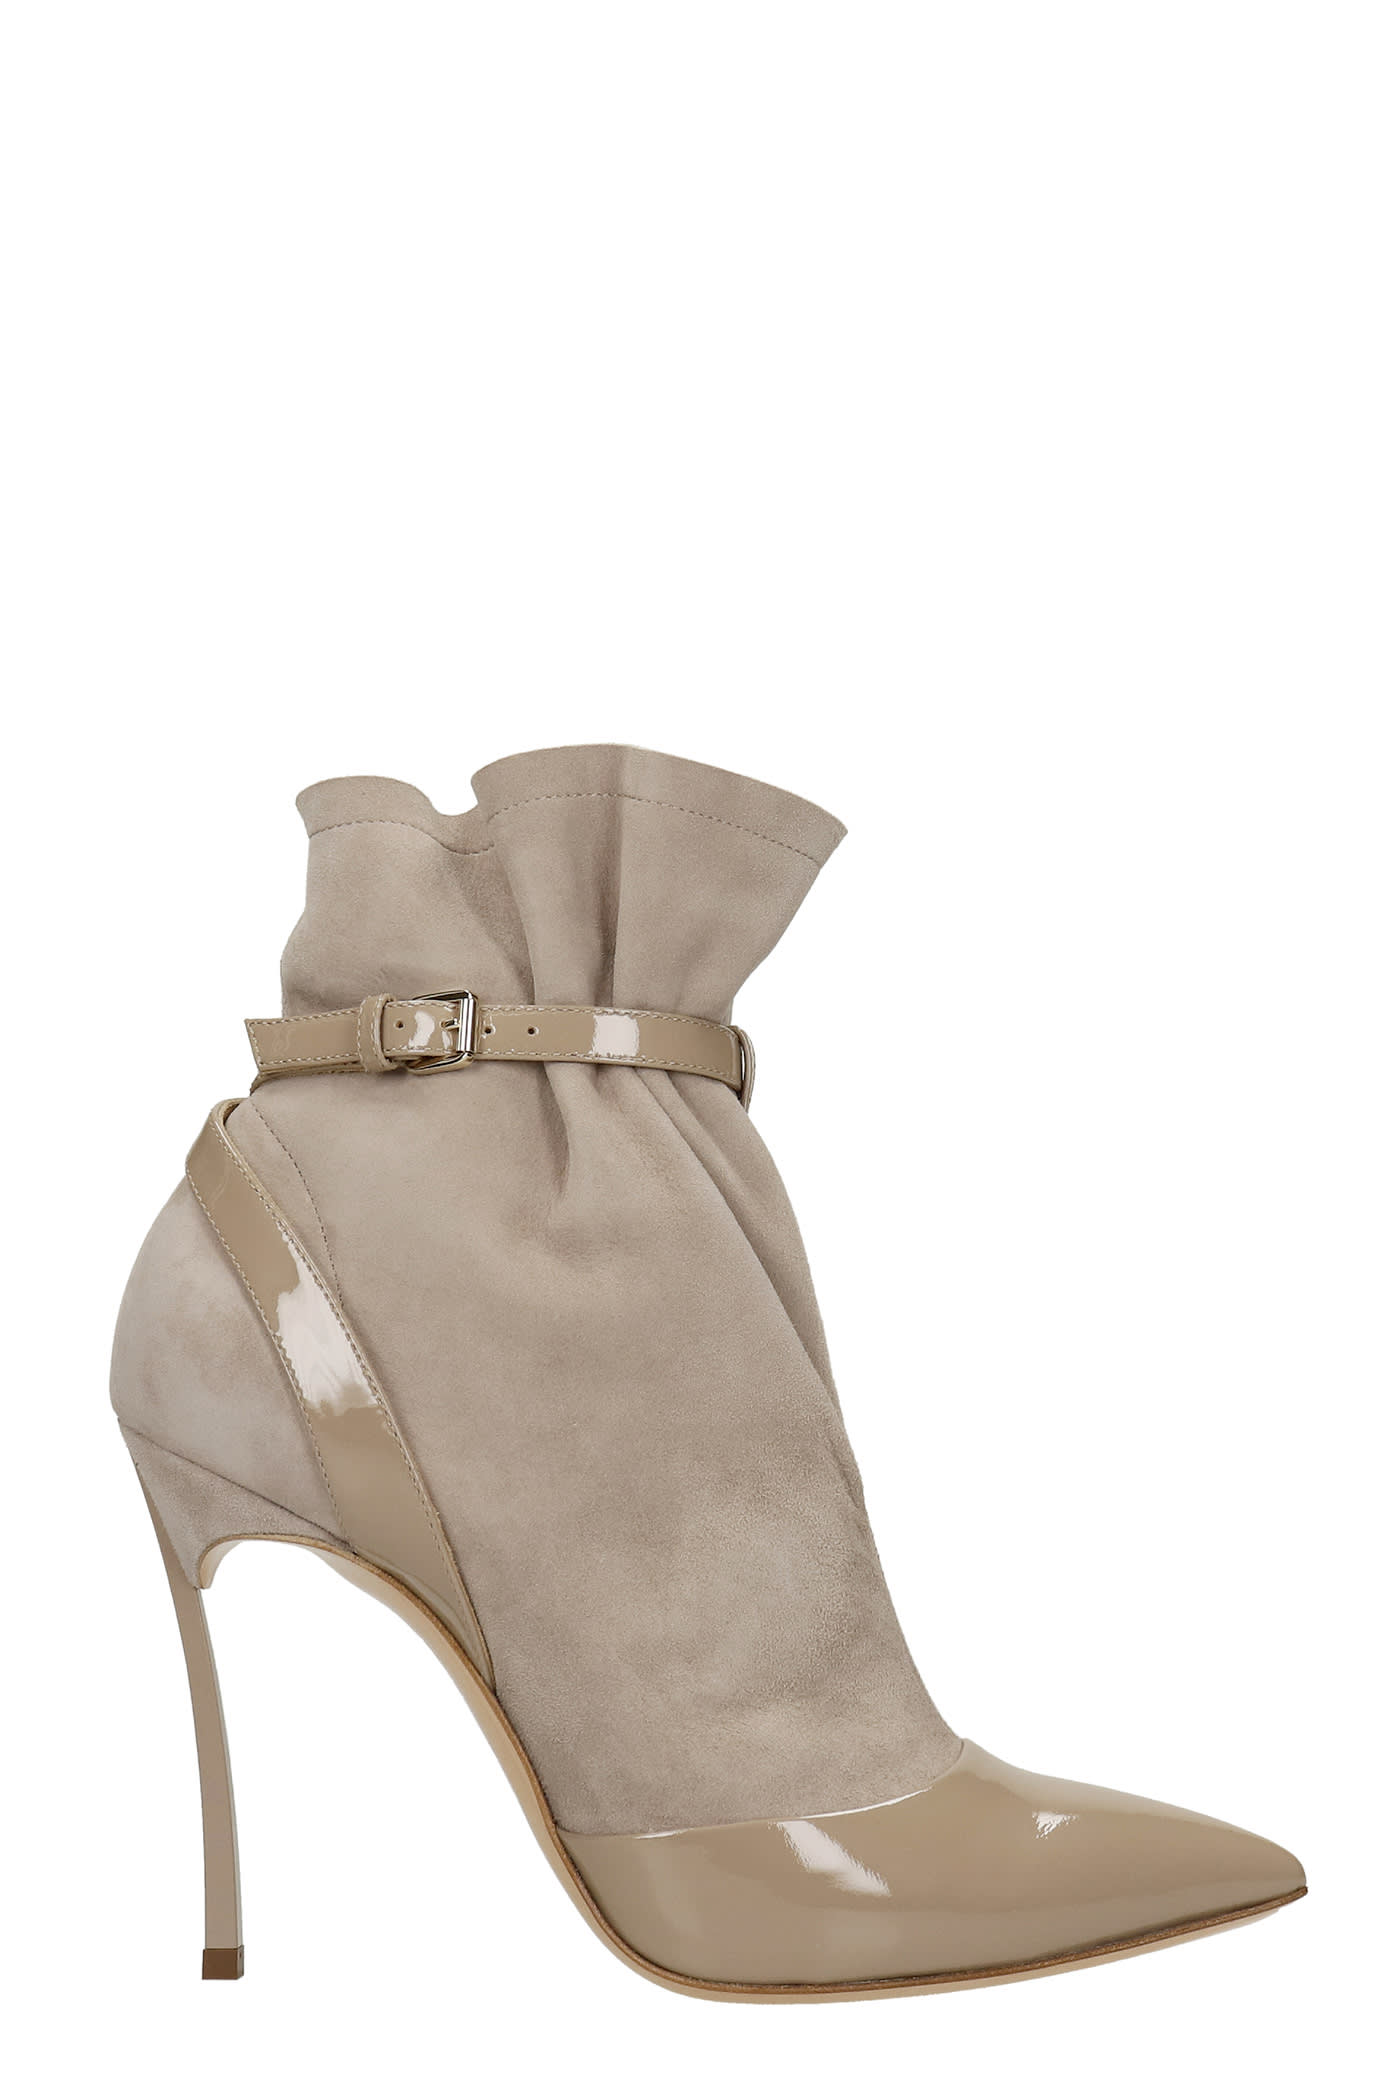 Casadei Blade Vogue High Heels Ankle Boots In Taupe Leather And Fabric